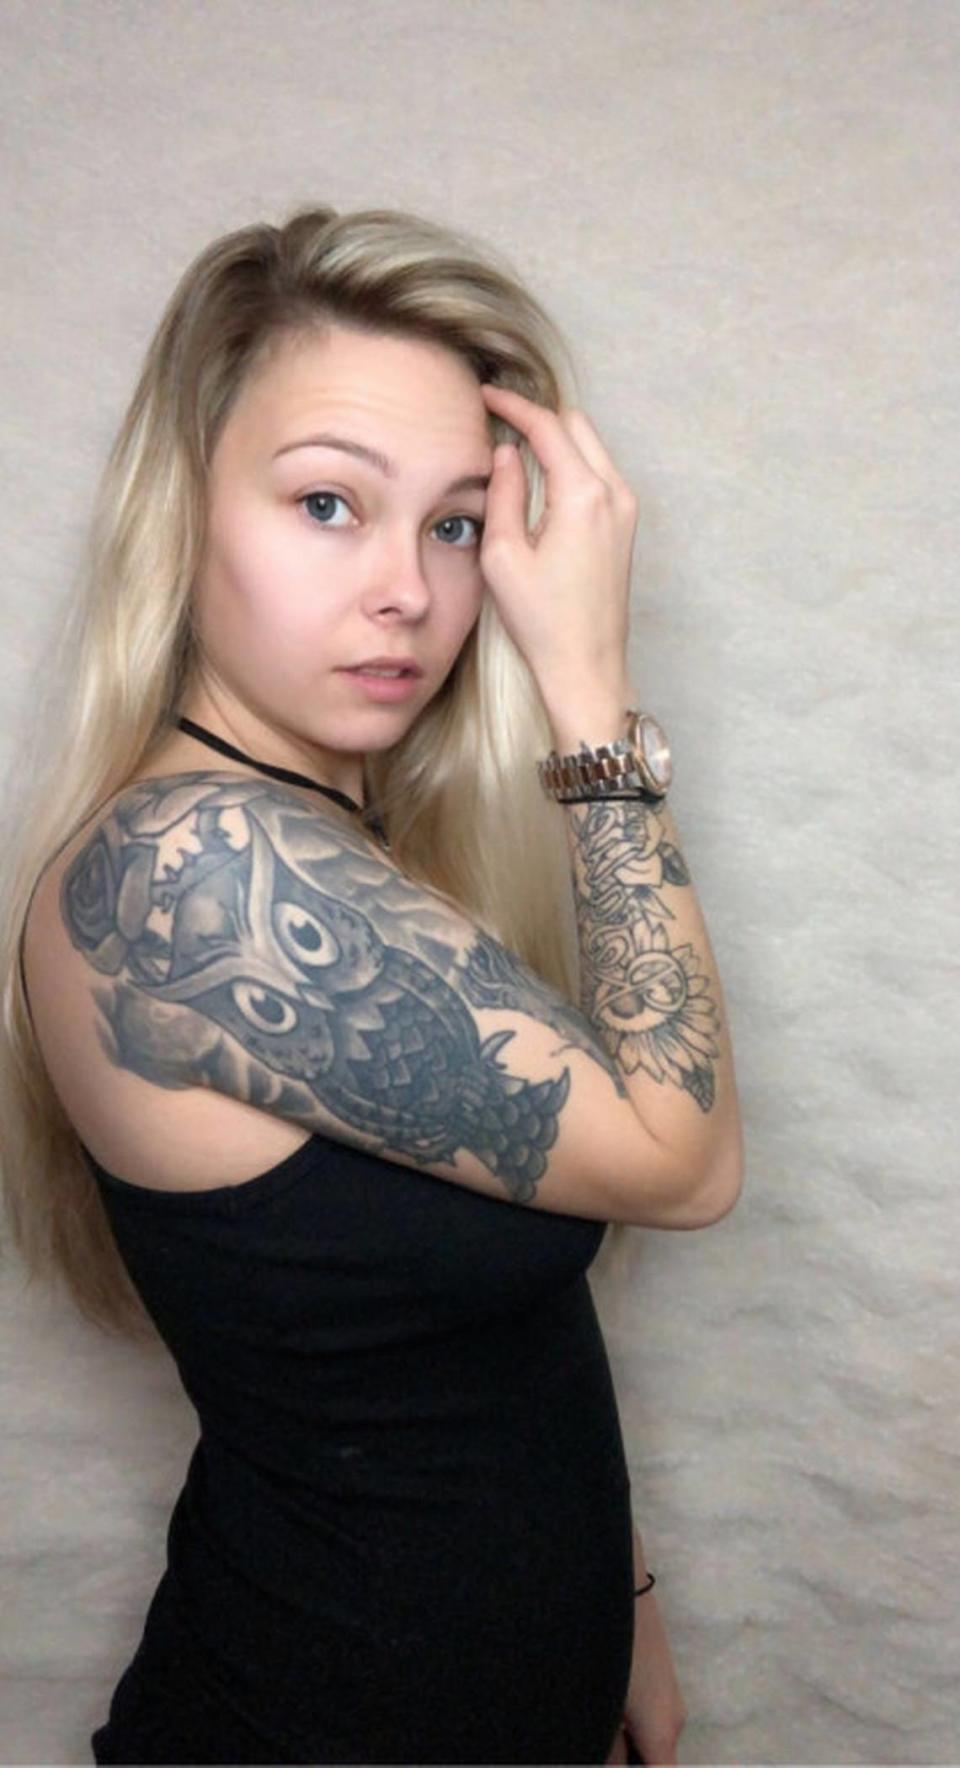 Biloxi resident Tía Dickerson is vying for the cover of Inked Magazine